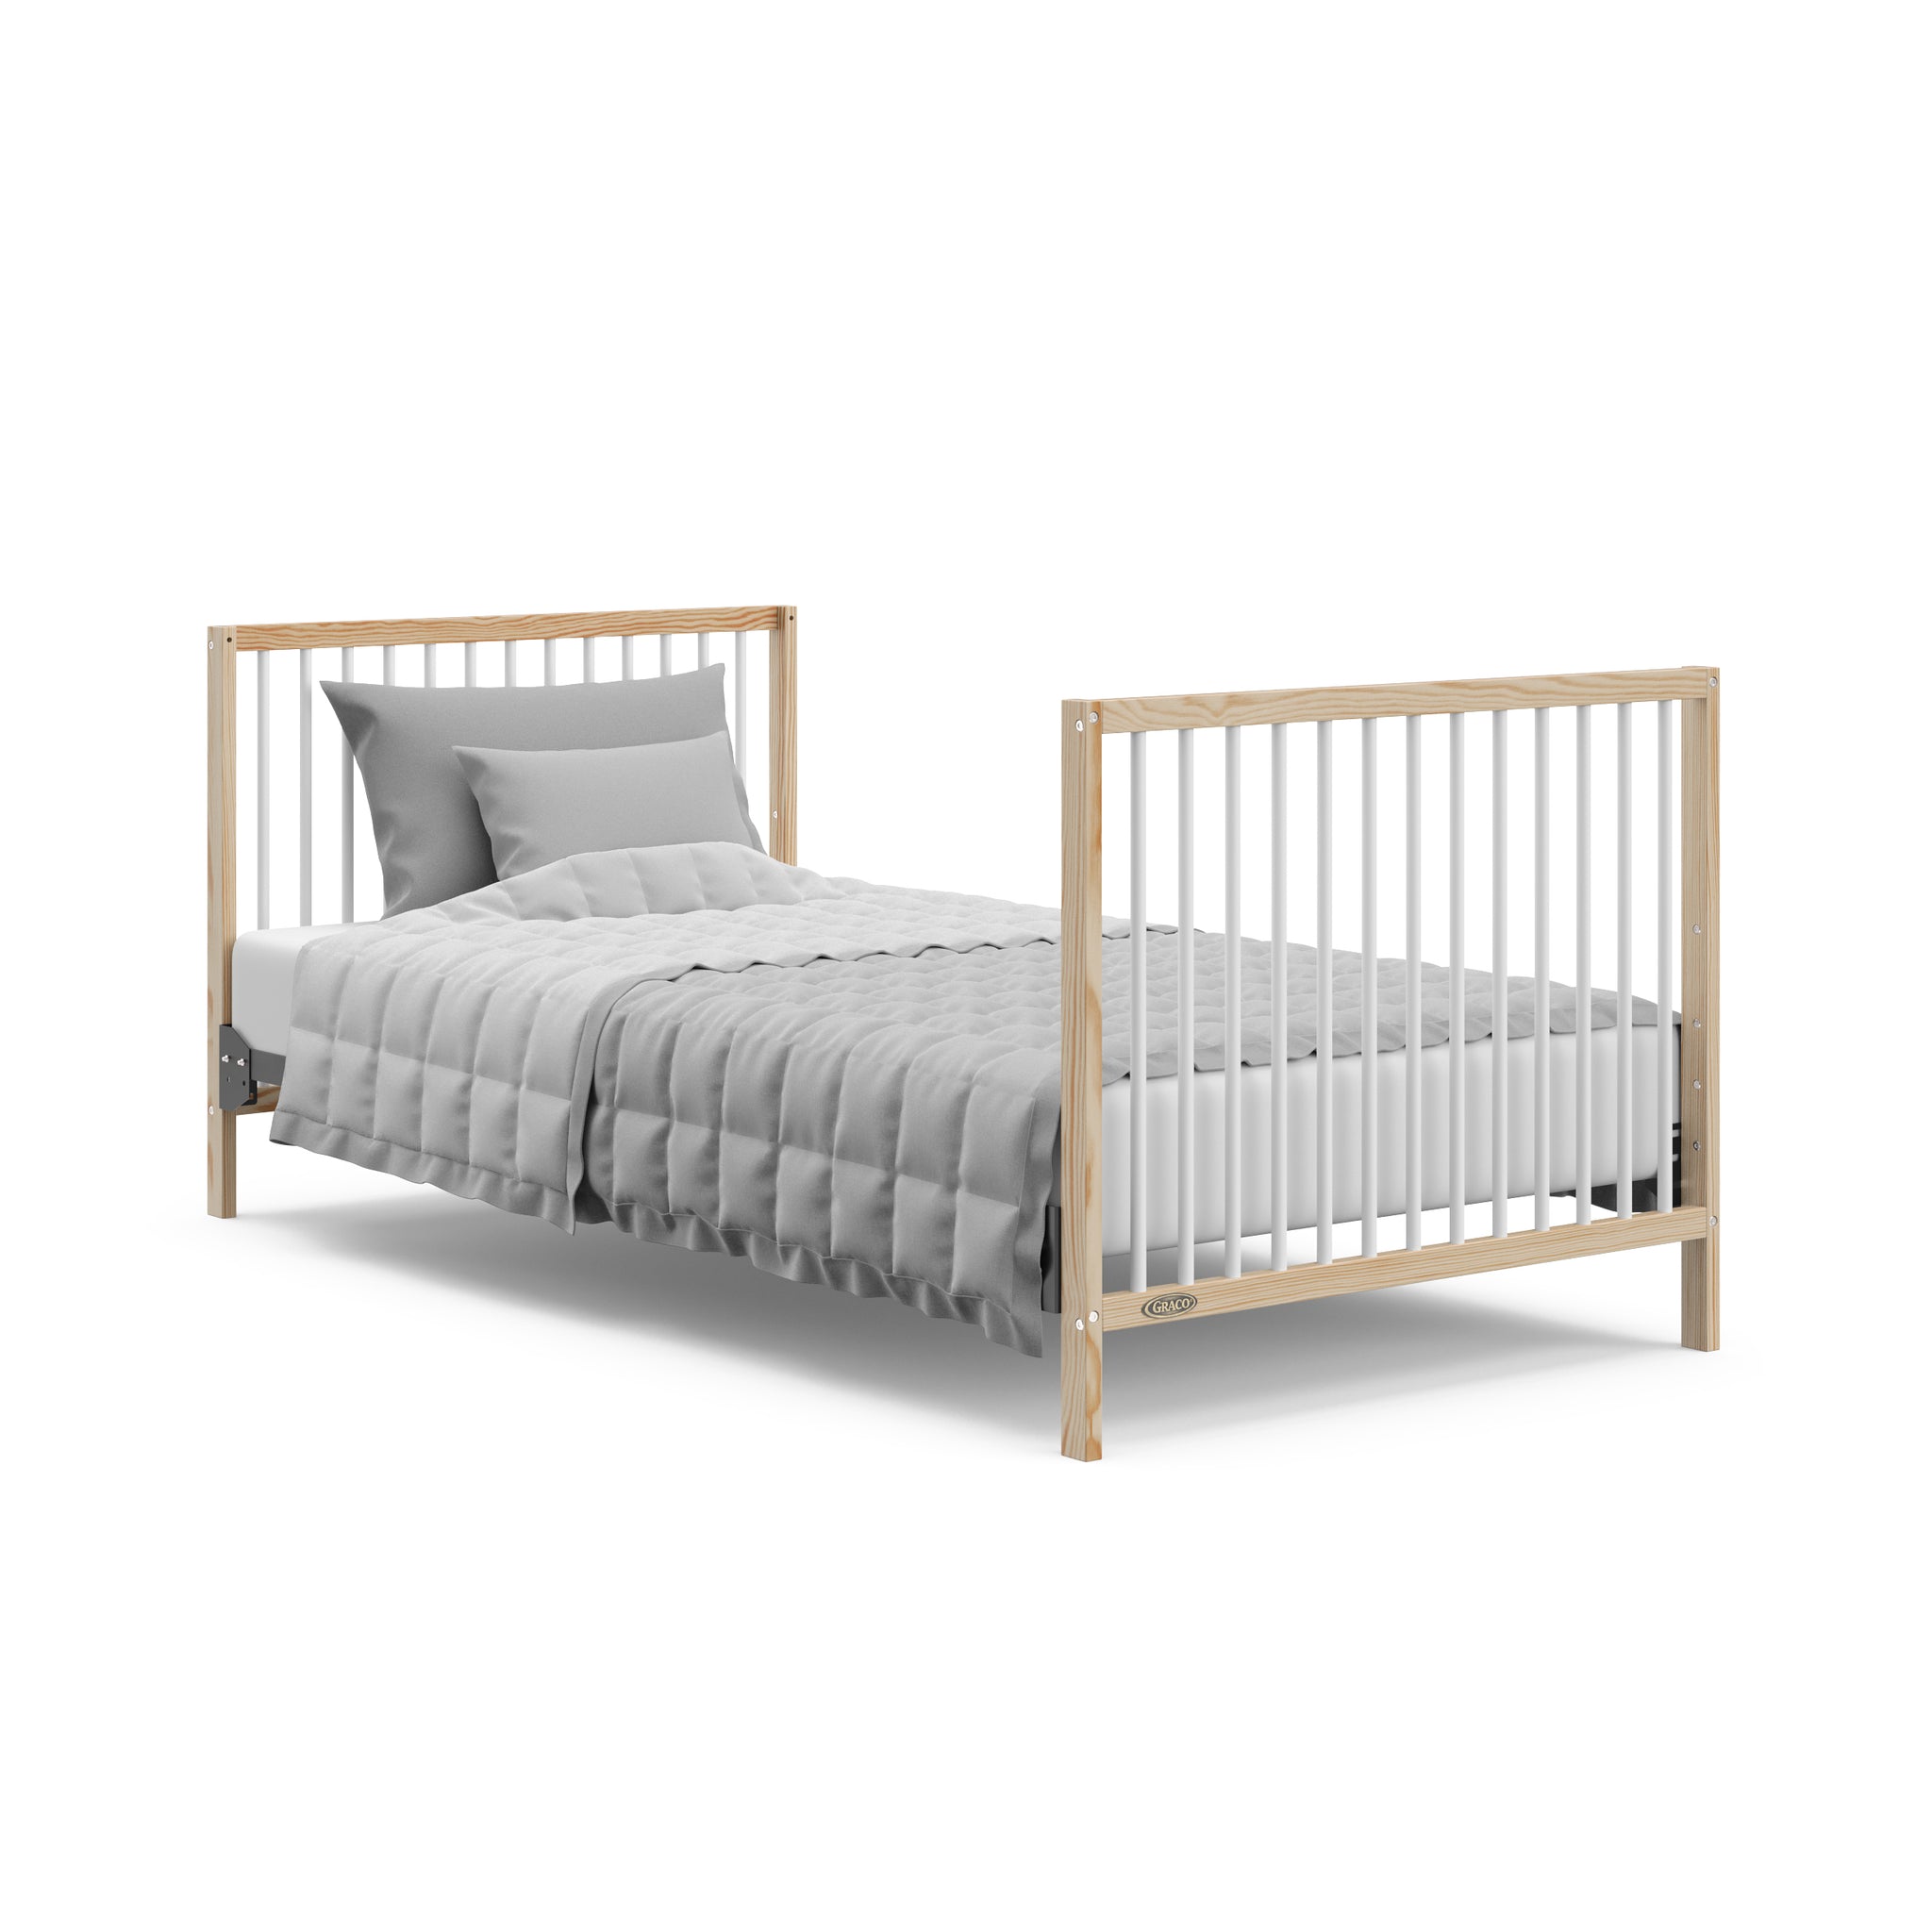 Natural with white mini crib in full-size bed conversion with headboard and footboard